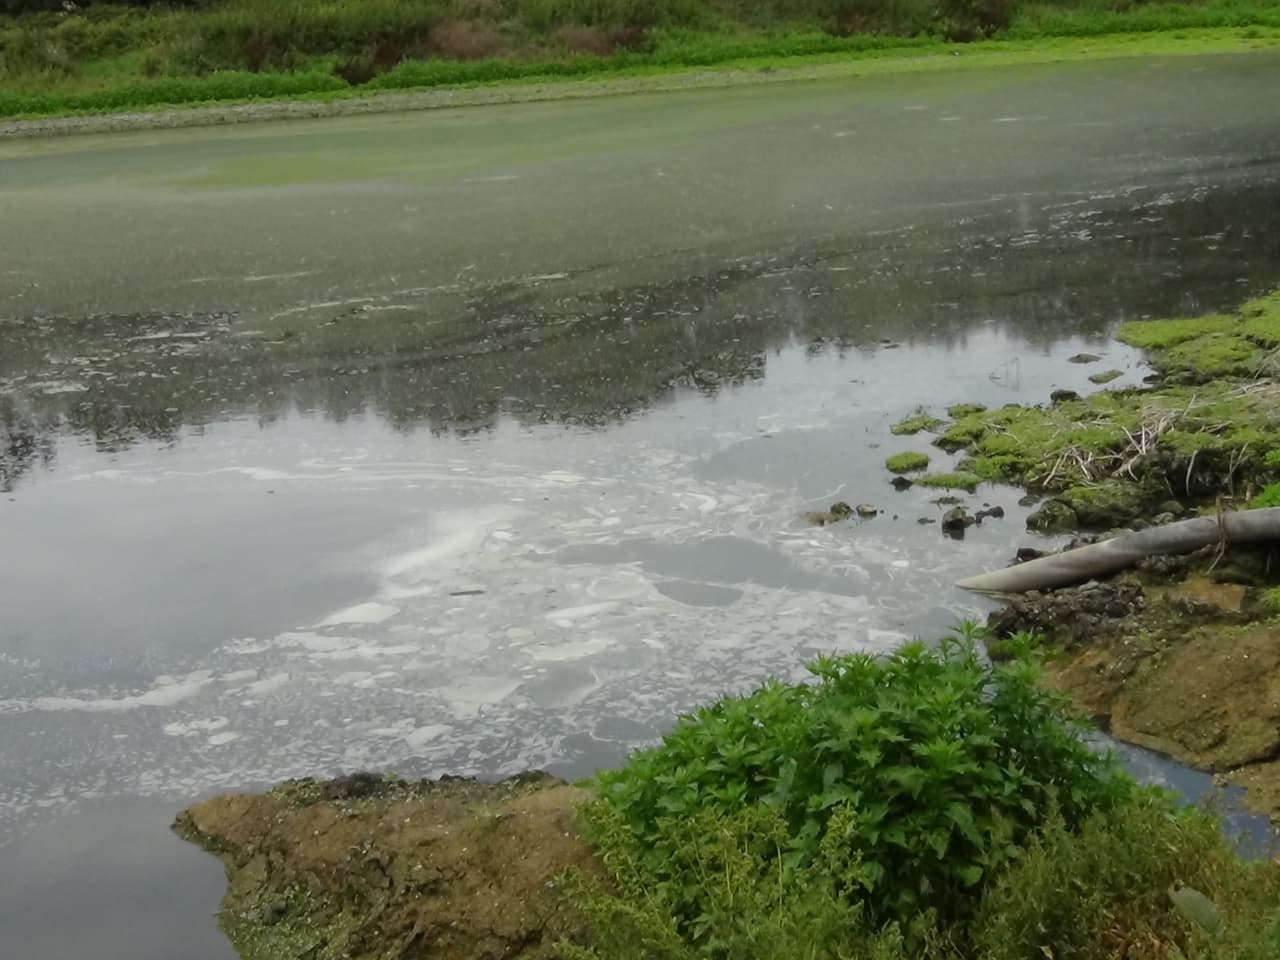 A picture of a pipe depositing waste into a lagoon on Crouchland Farm